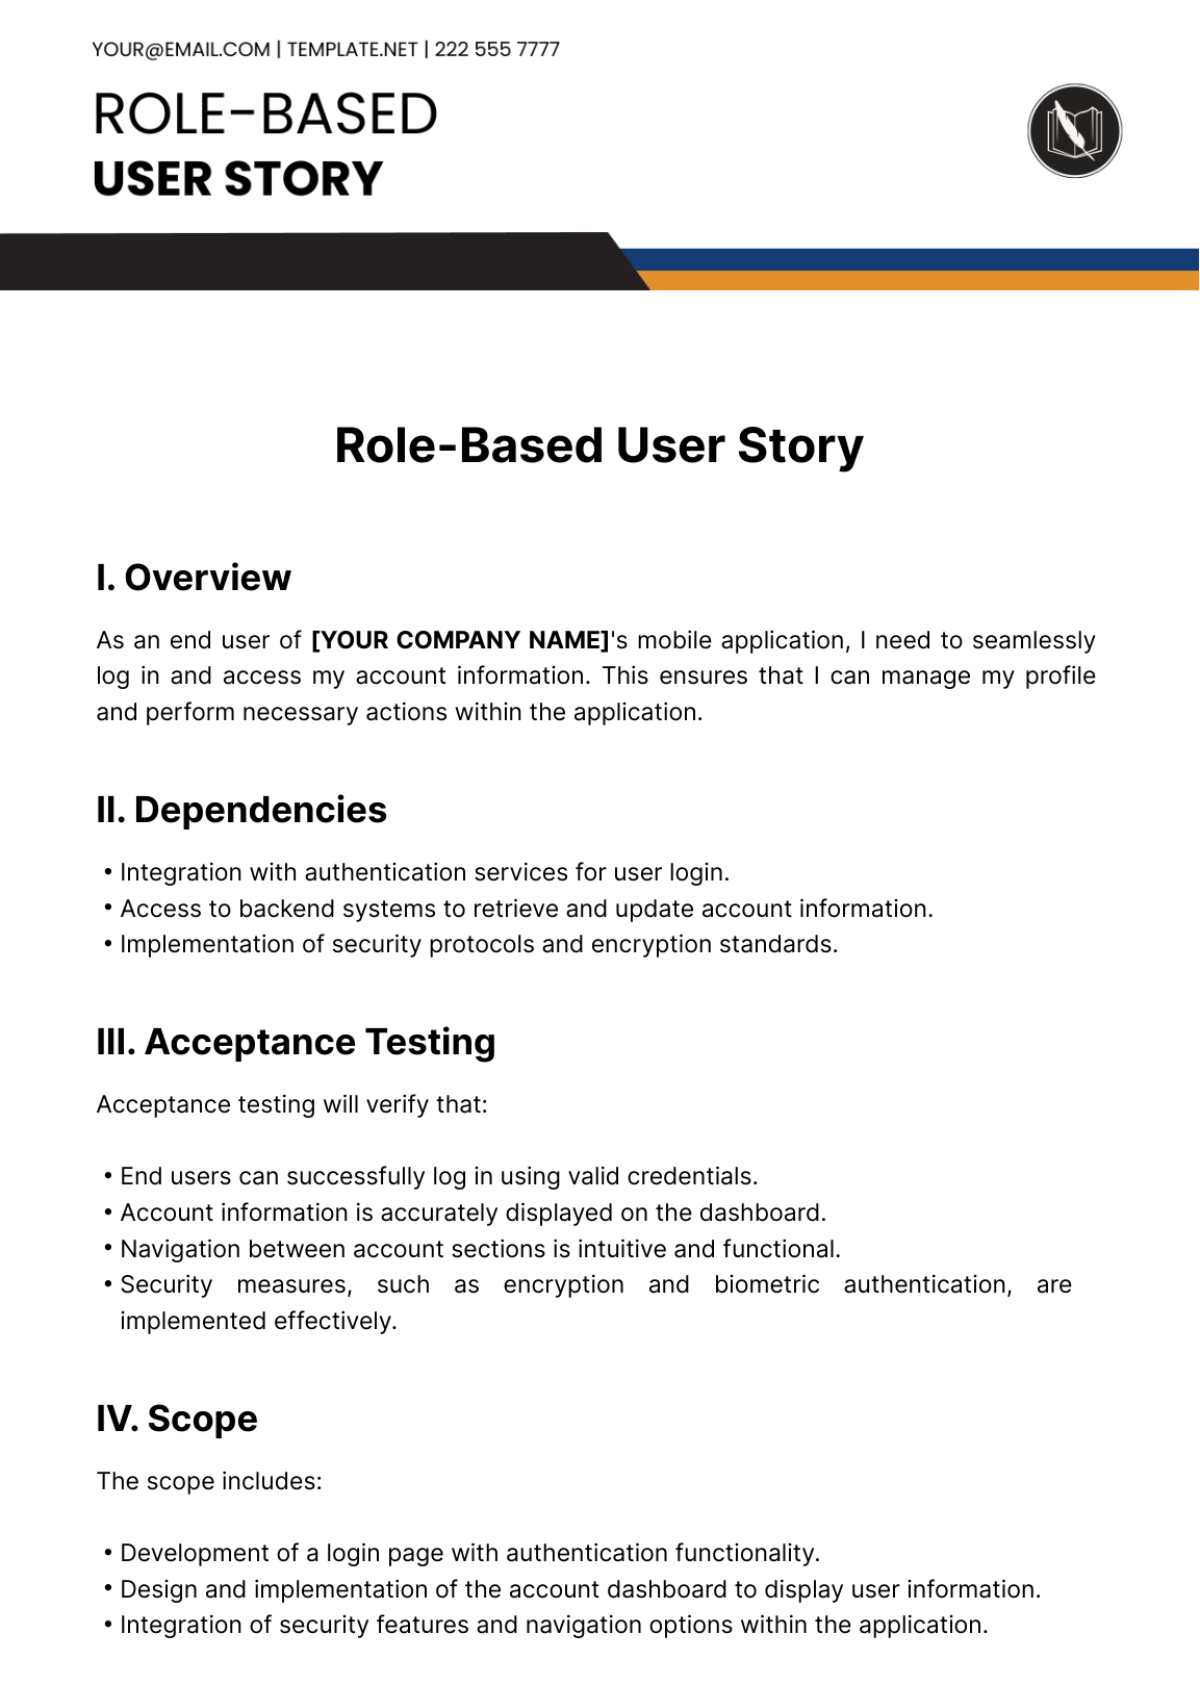 Free Role-Based User Story Template